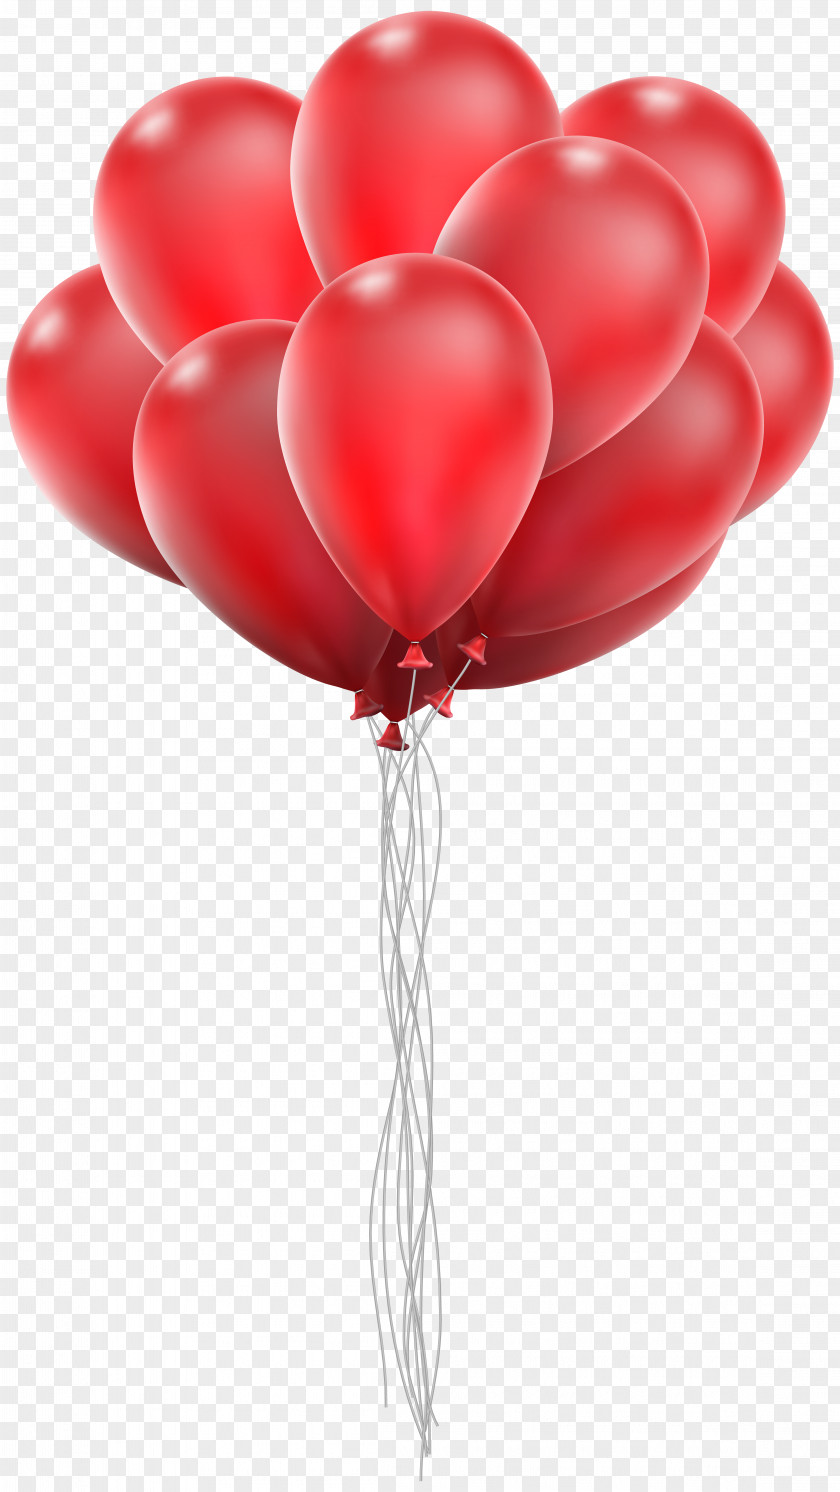 Balloon Bunch Clip Art Image Red Love Heart PNG